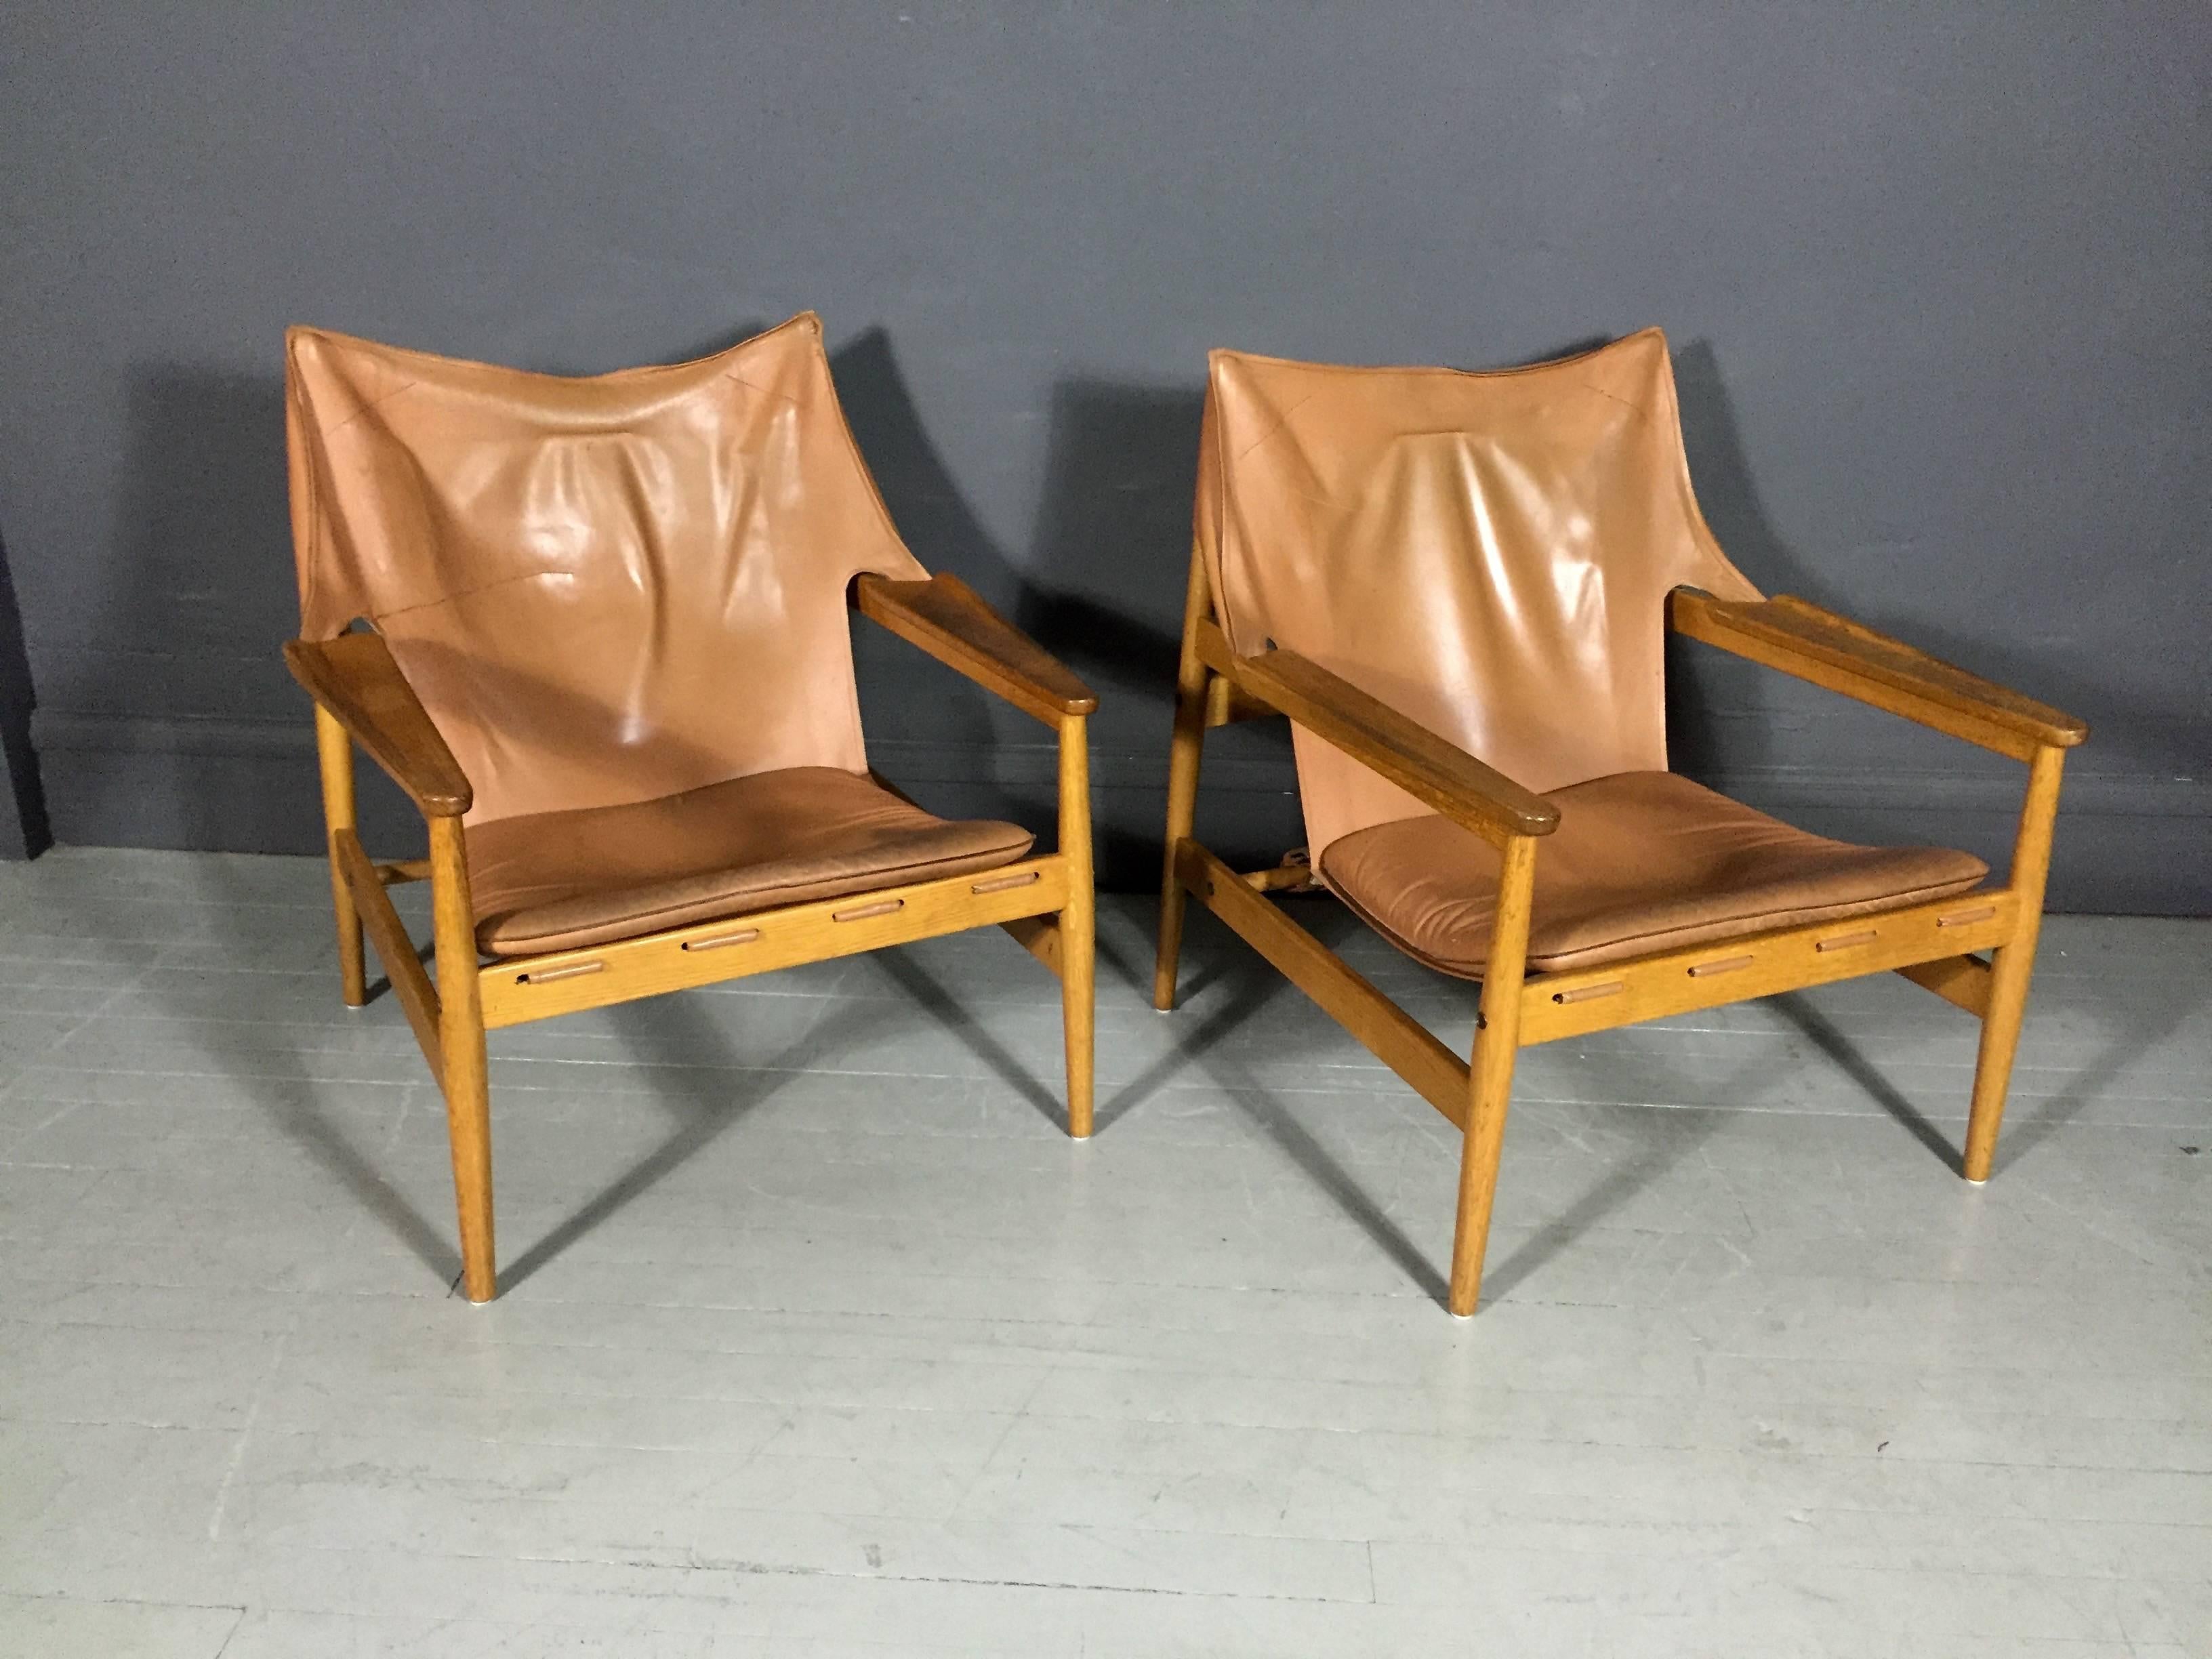 Spectacular pair of sling or safari chairs in rare tan all-leather with oak frames, contoured arms, lightly cushioned loose seat, fitted leather back with three-buckle support. Hans Olsen for Viskadalens Möbelfabrik AB, Denmark, 1960s.

One chair